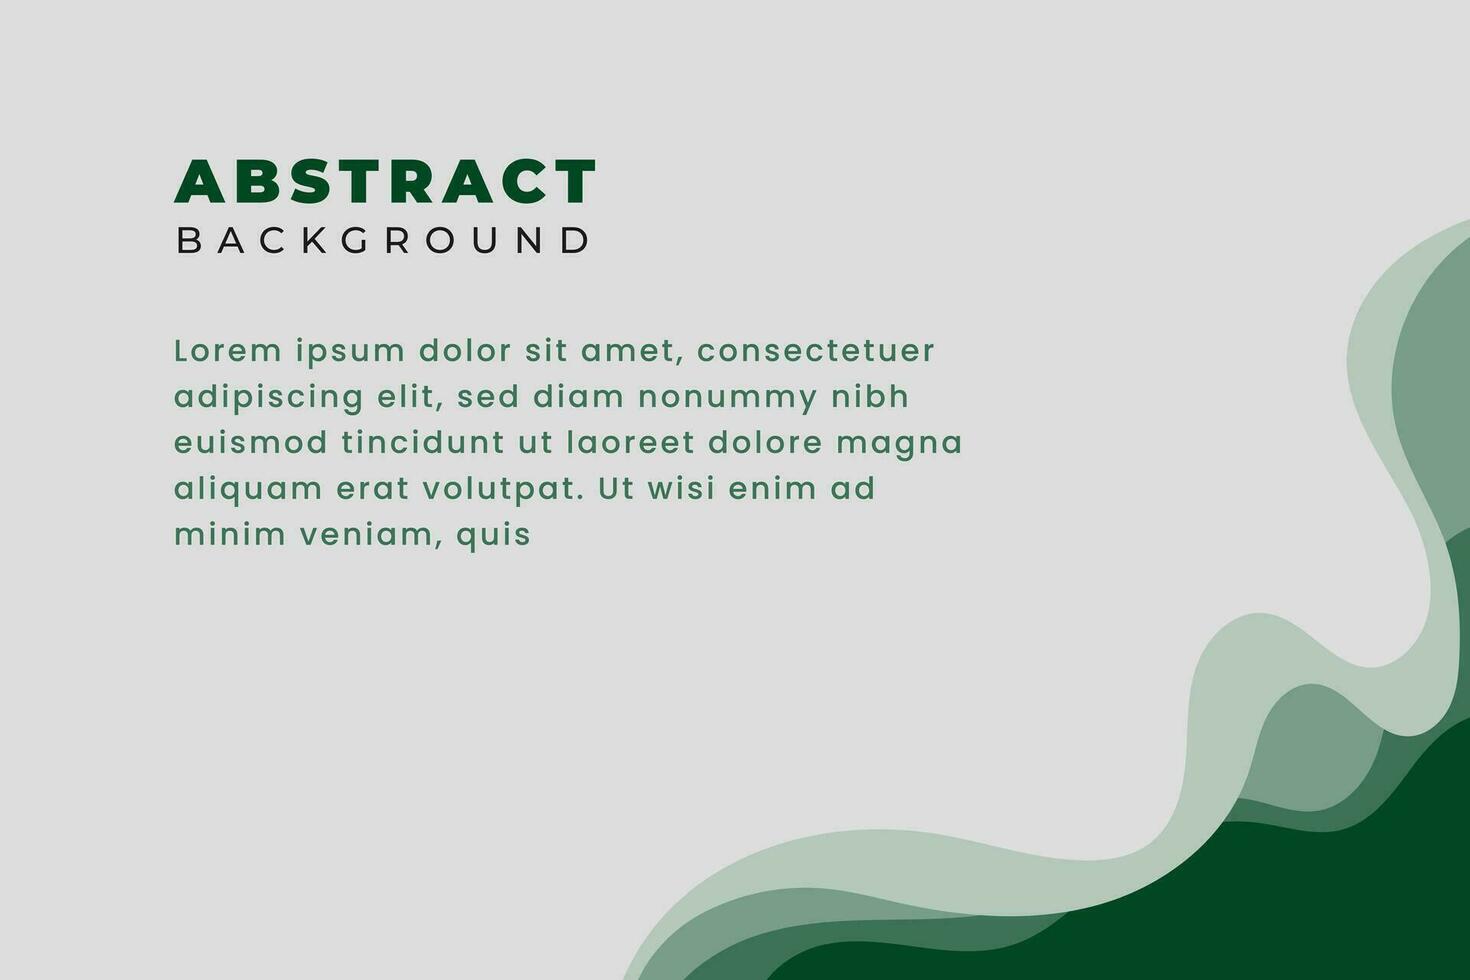 Abstract background desain with whitespace vector